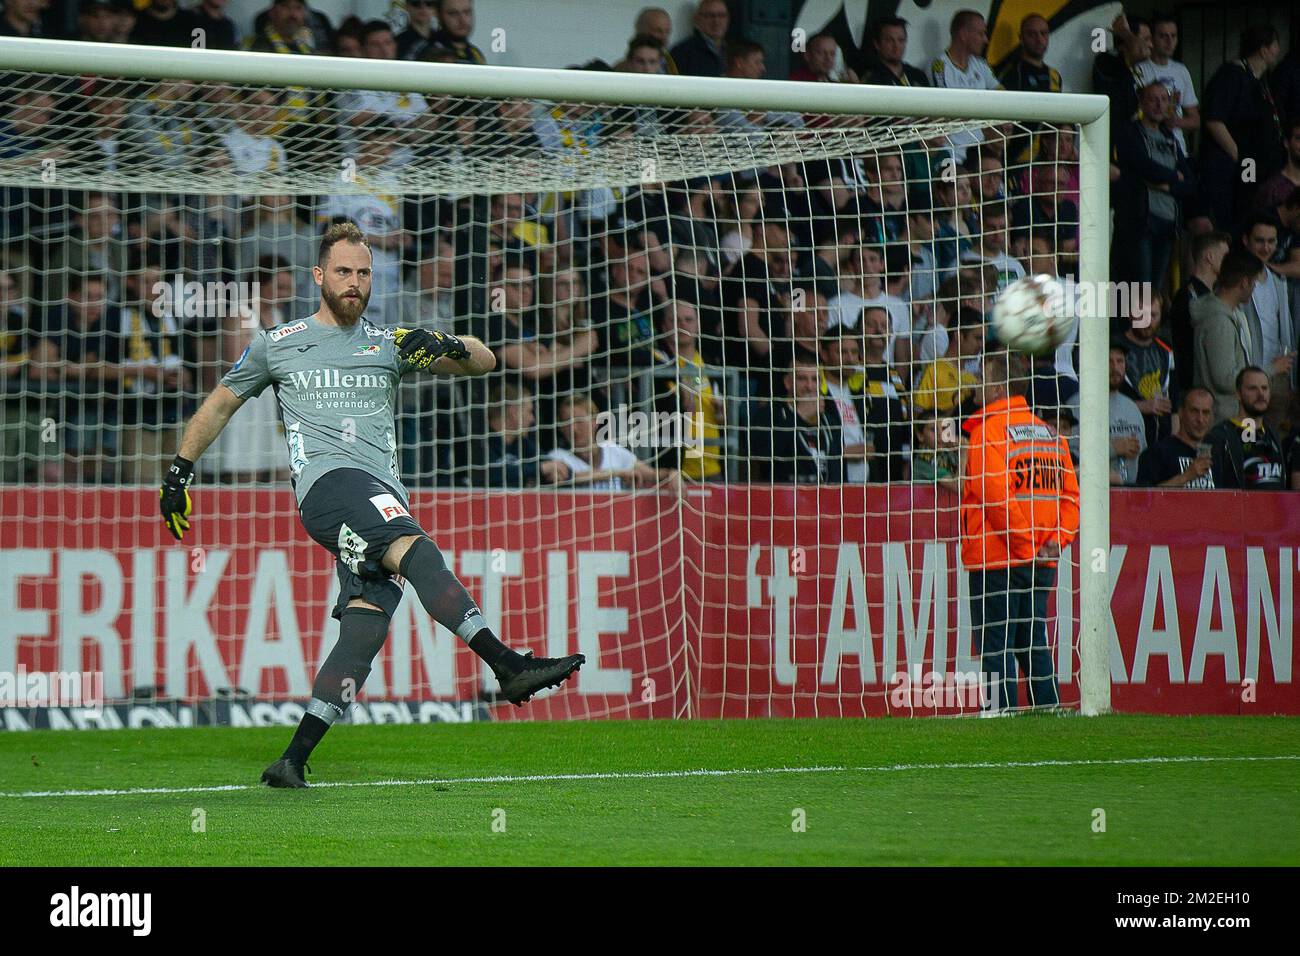 Oostende's goalkeeper Mike Vanhamel pictured in action during the Jupiler Pro League match between Sporting Lokeren and KV Oostende, in Lokeren, Wednesday 18 April 2018, on day four of the Play-Off 2B of the Belgian soccer championship. BELGA PHOTO JAMES ARTHUR GEKIERE Stock Photo